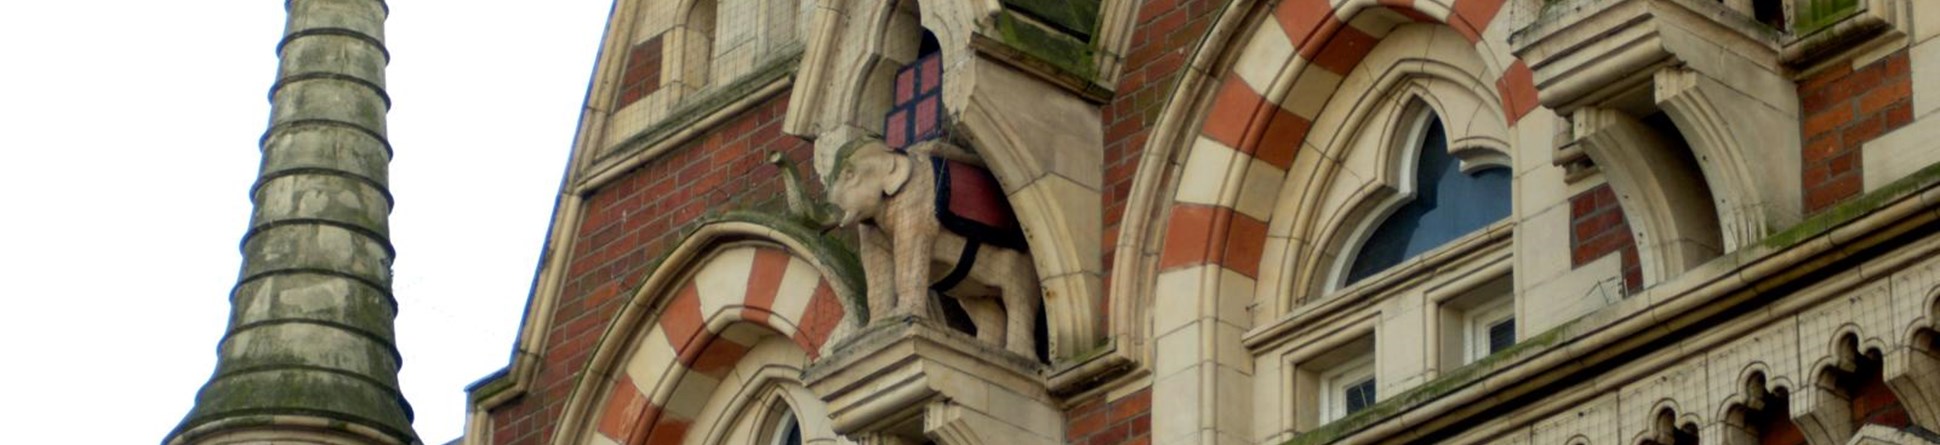 Carving of two elephants on the side of a building.